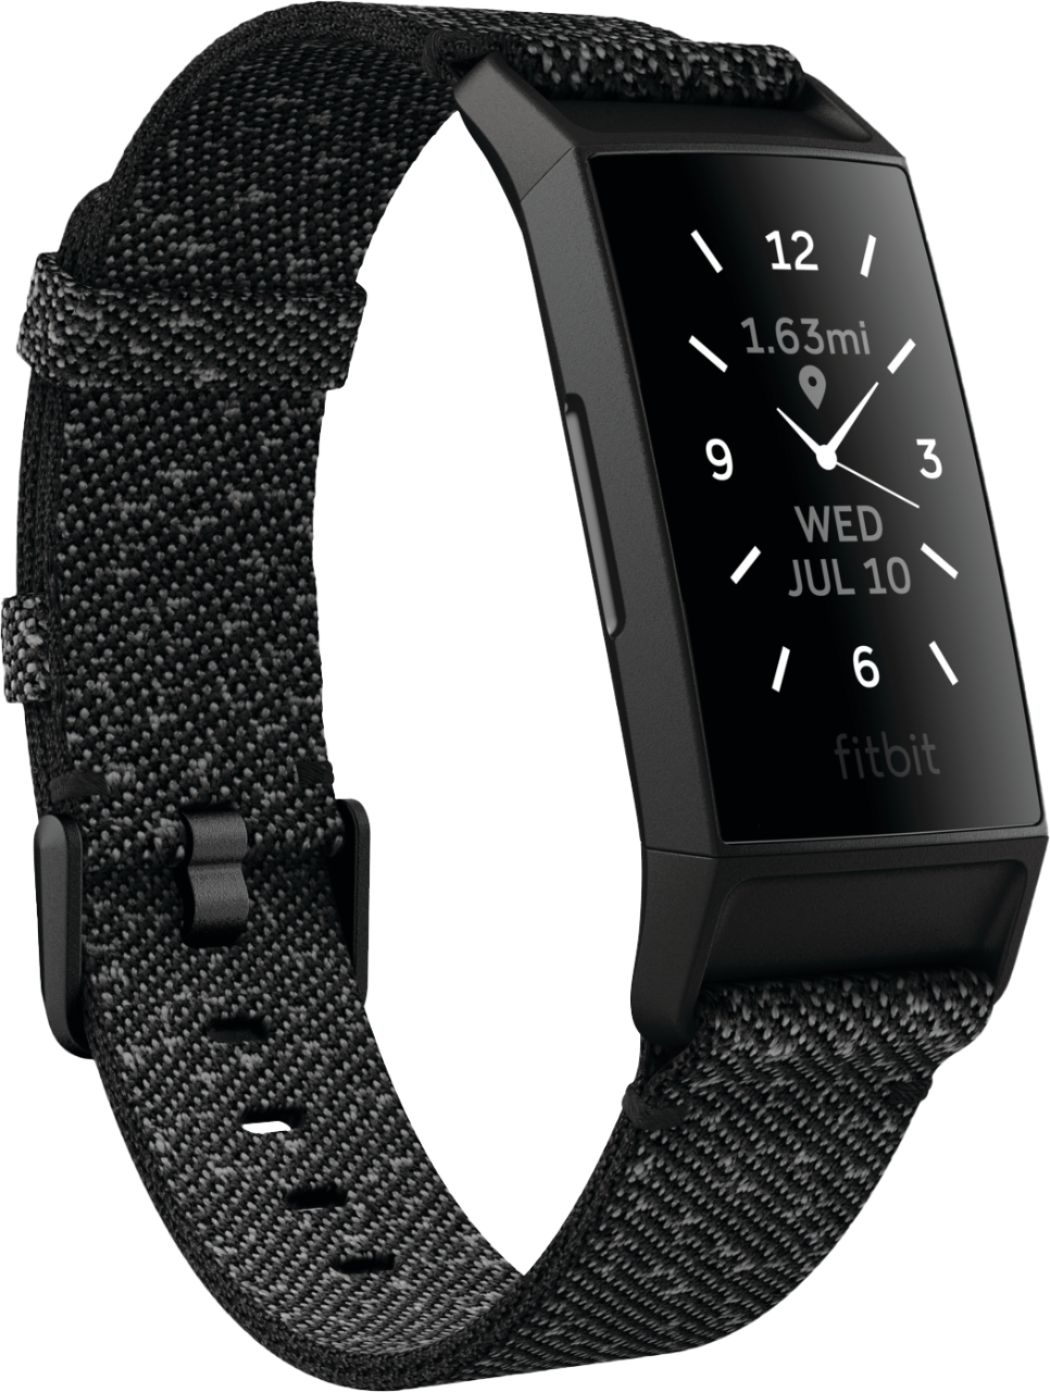 Angle View: Fitbit - Charge 4 Special Edition Activity Tracker GPS + Heart Rate - Granite Reflective